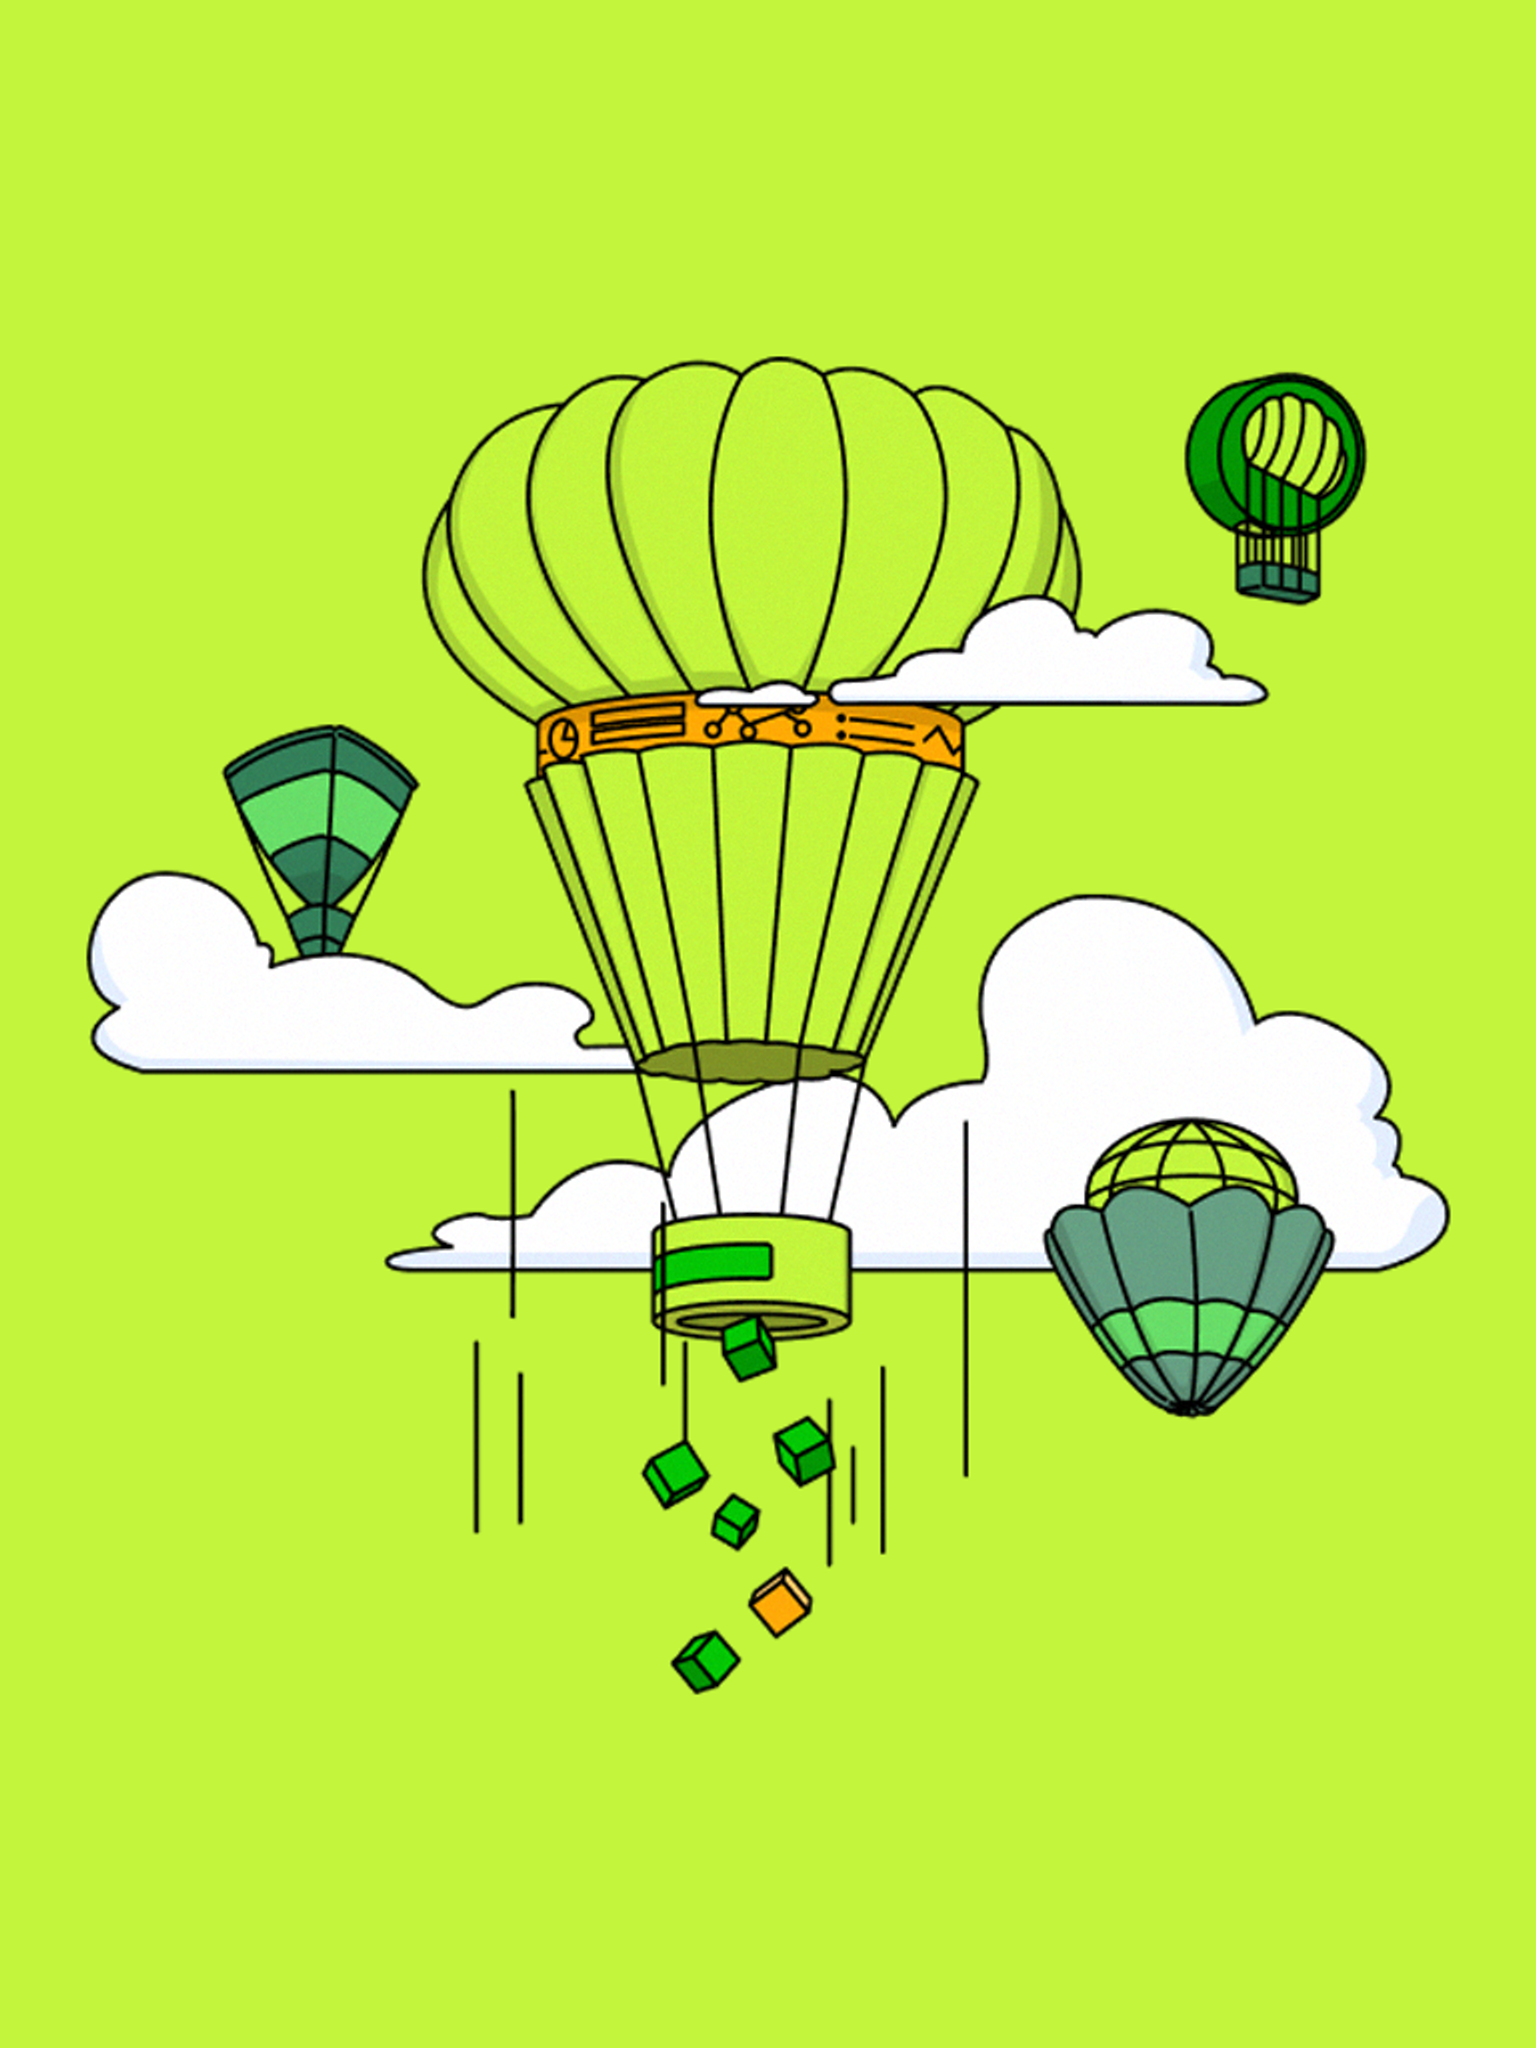 Stylized hot air balloons with one dropping colorful shapes, against a green background with clouds.